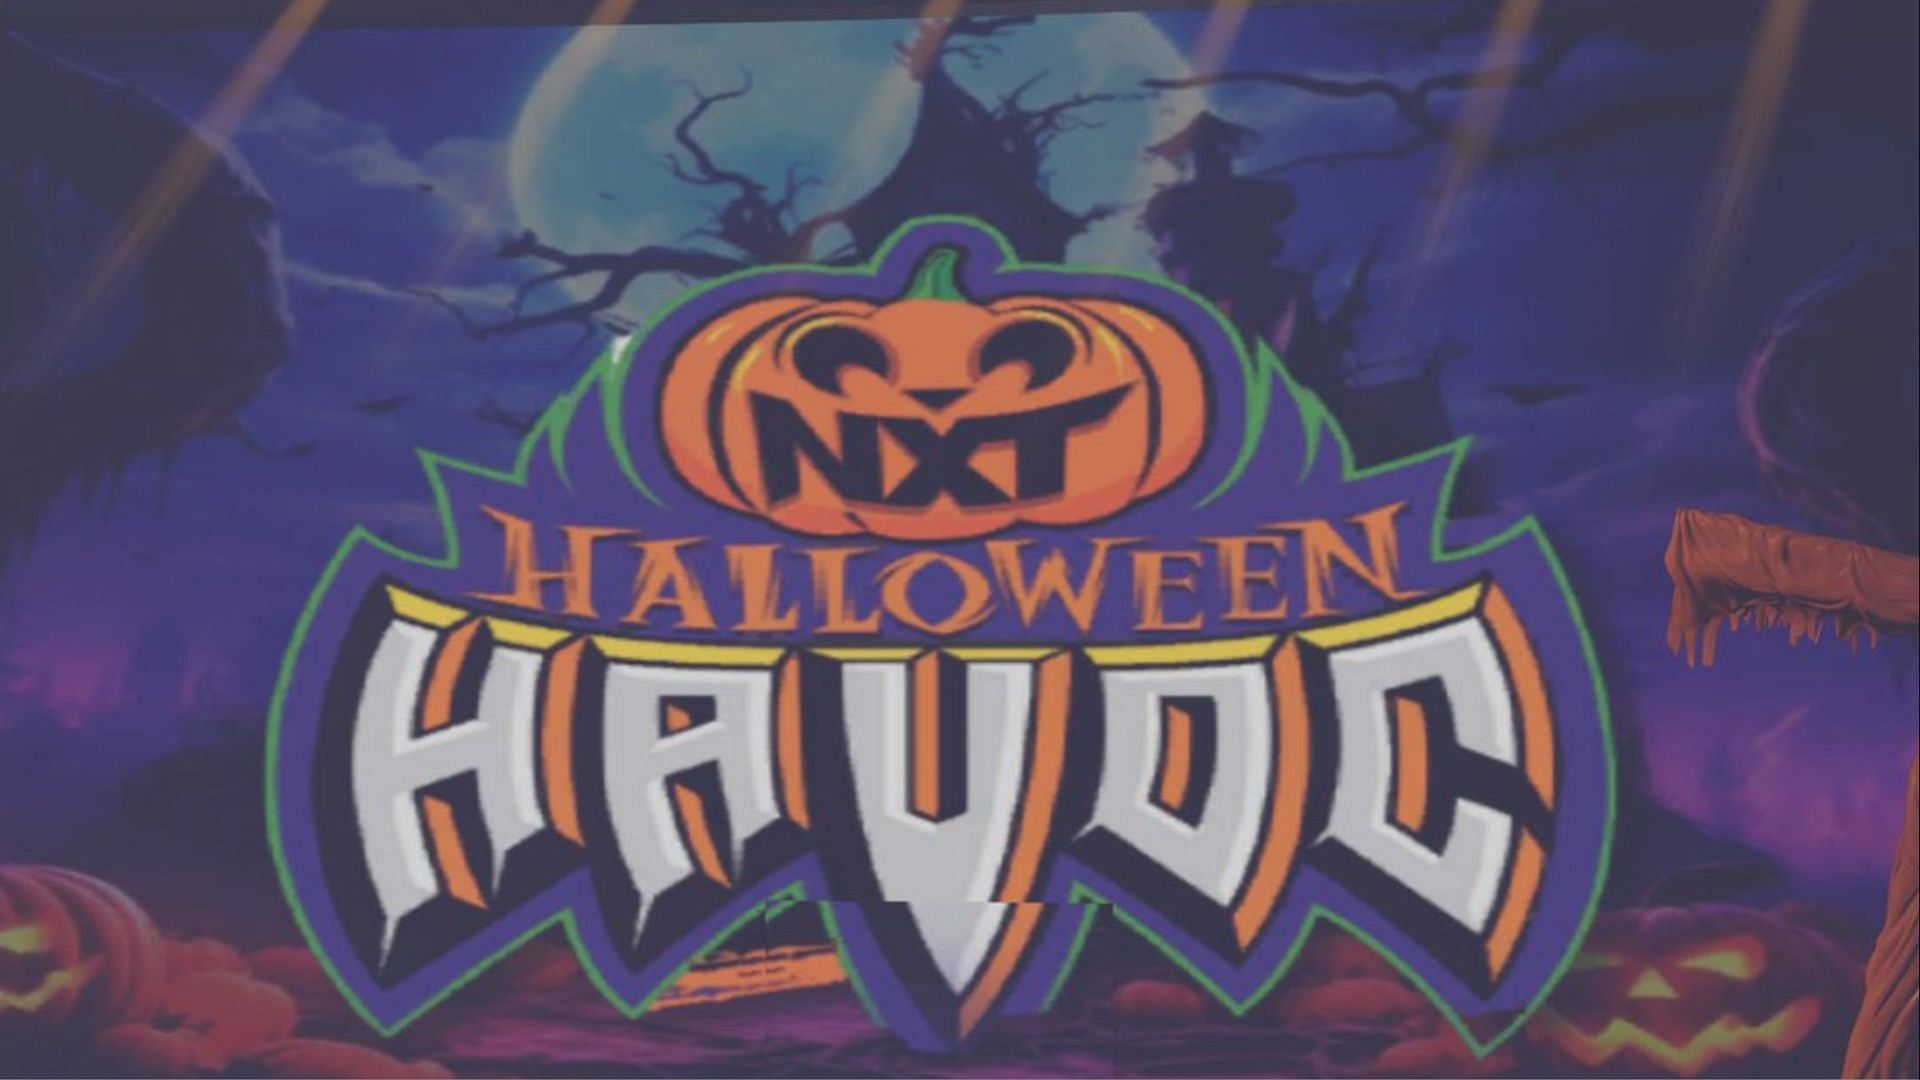 NXT Halloween Havoc Night 1 aired from the WWE Performance Center.